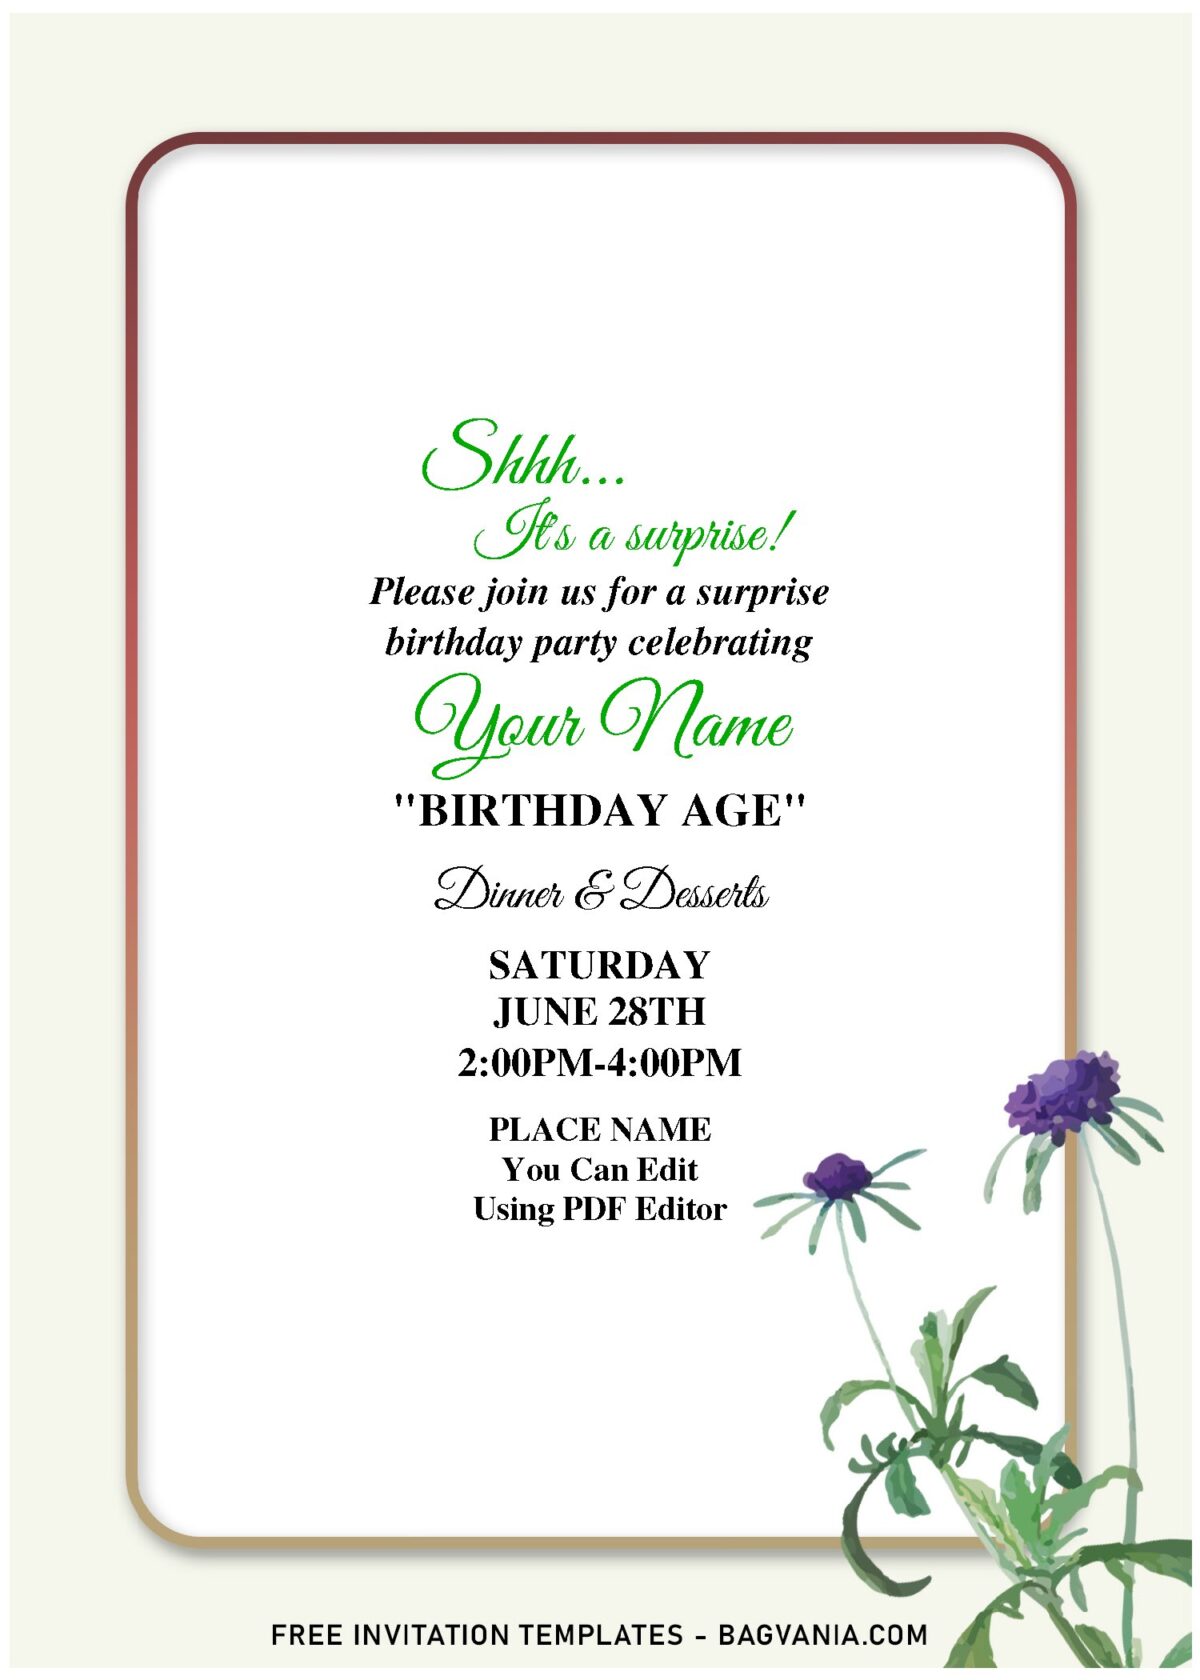 (Free Editable PDF) Mixed Southern Summer Flowers Invitation Templates